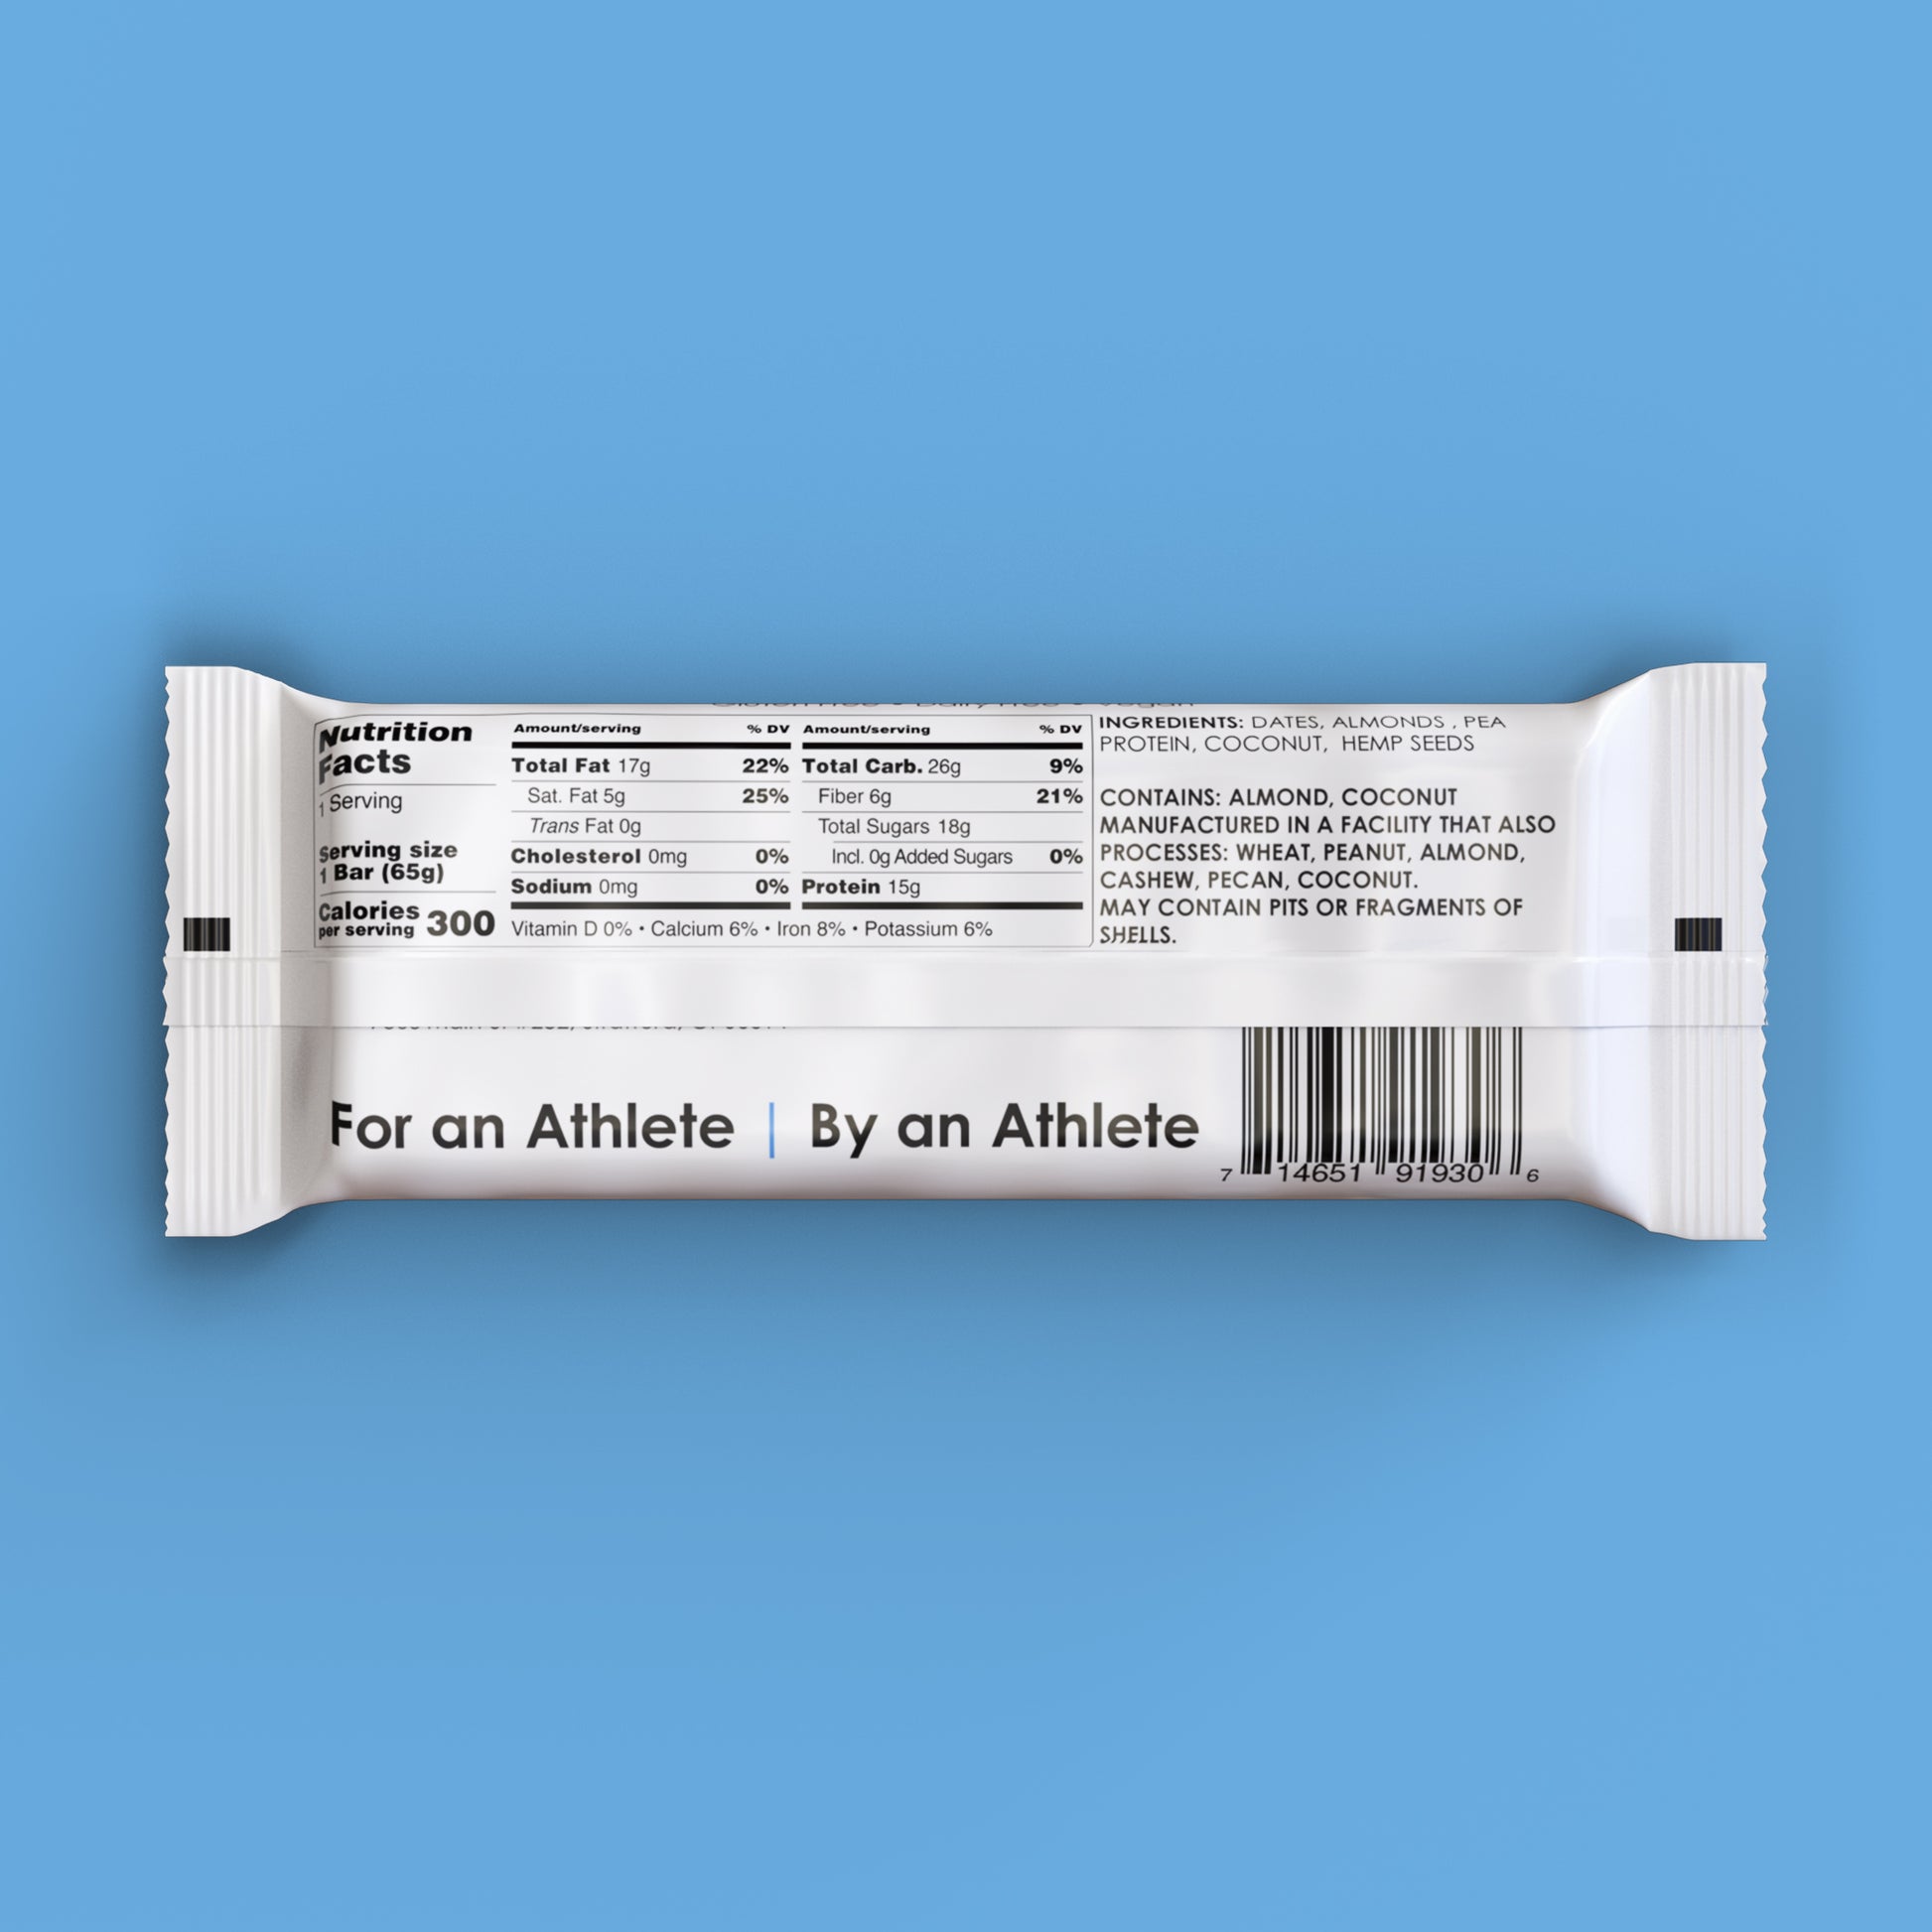 An almond coconut TIROBAR, a vegan and all natural protein bar, sits in a white wrapper against a blue background. The bar is visible from the top with a clear view of the nutrition facts. For an Athlete | By an Athlete